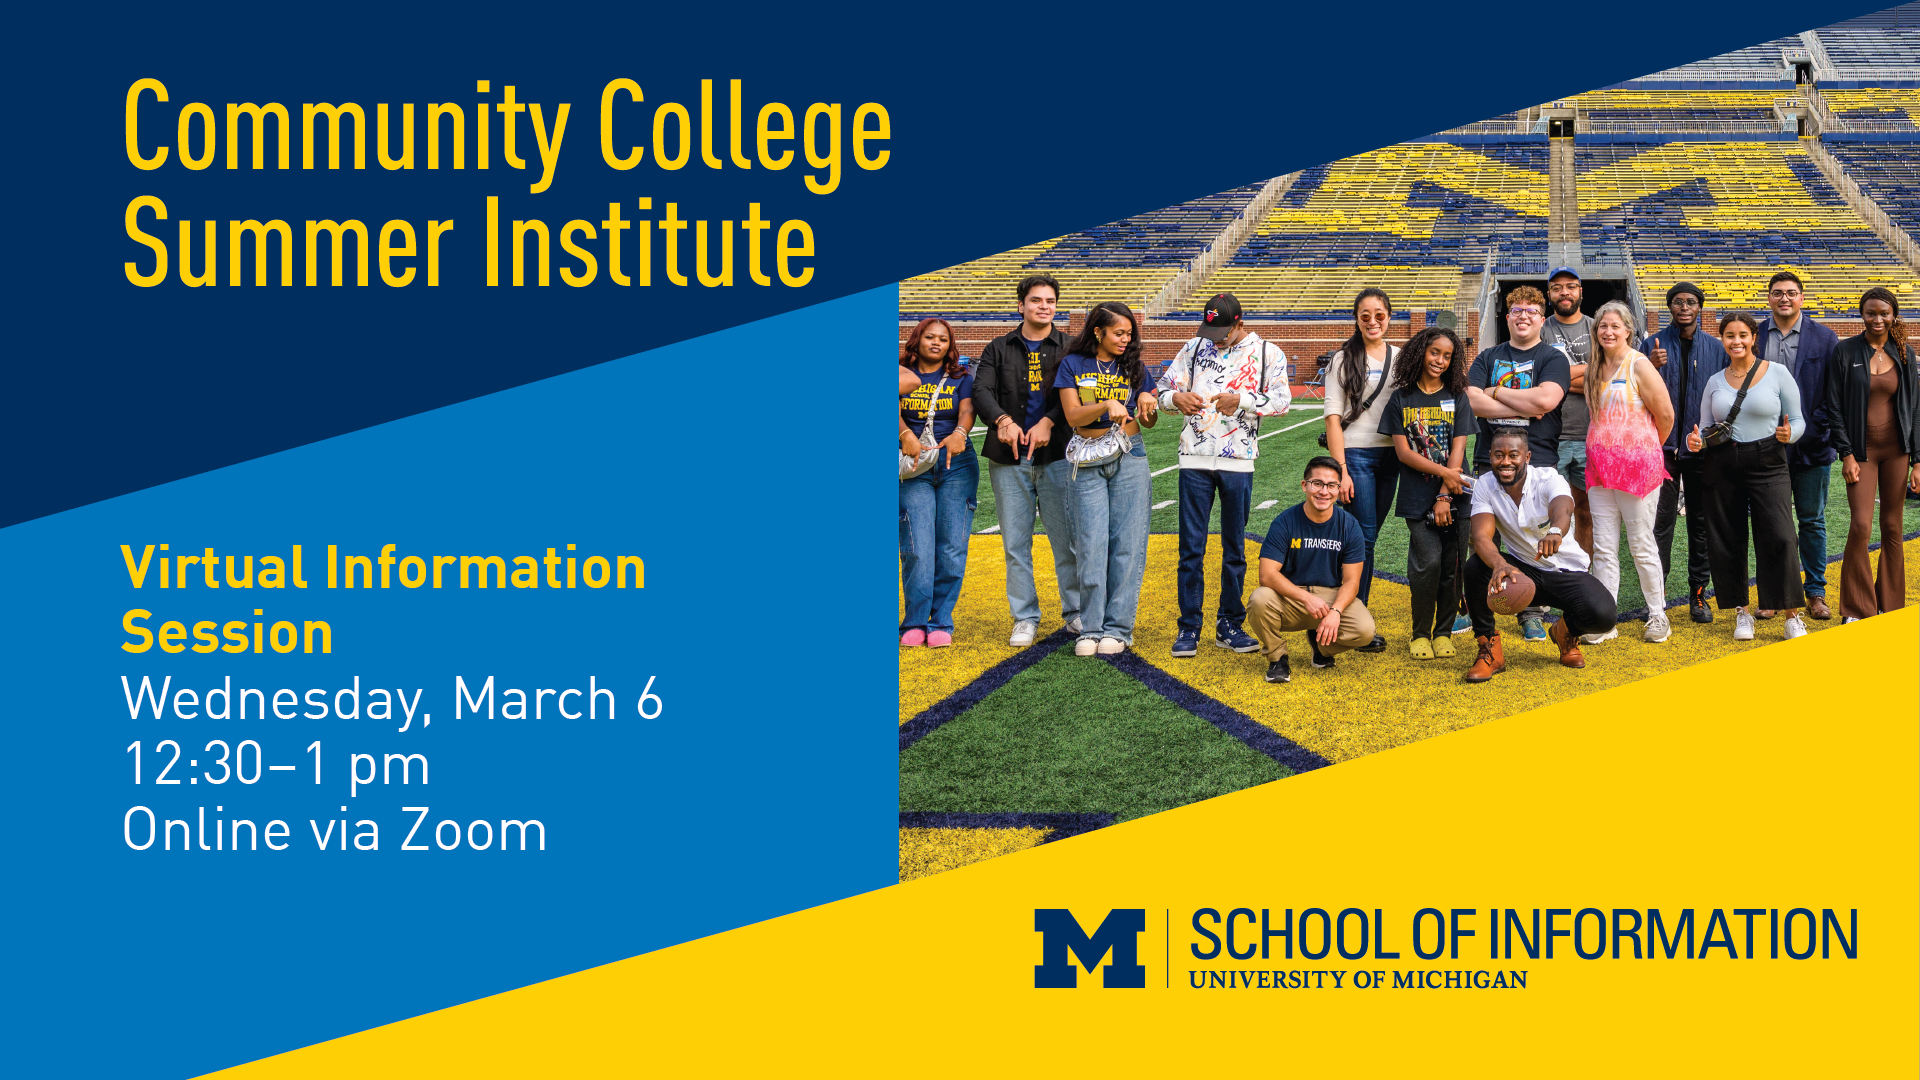 "Community College Summer Institute Virtual Information Session. Wednesday, March 6. 12:30-1 pm. Online via Zoom. University of Michigan School of Information."